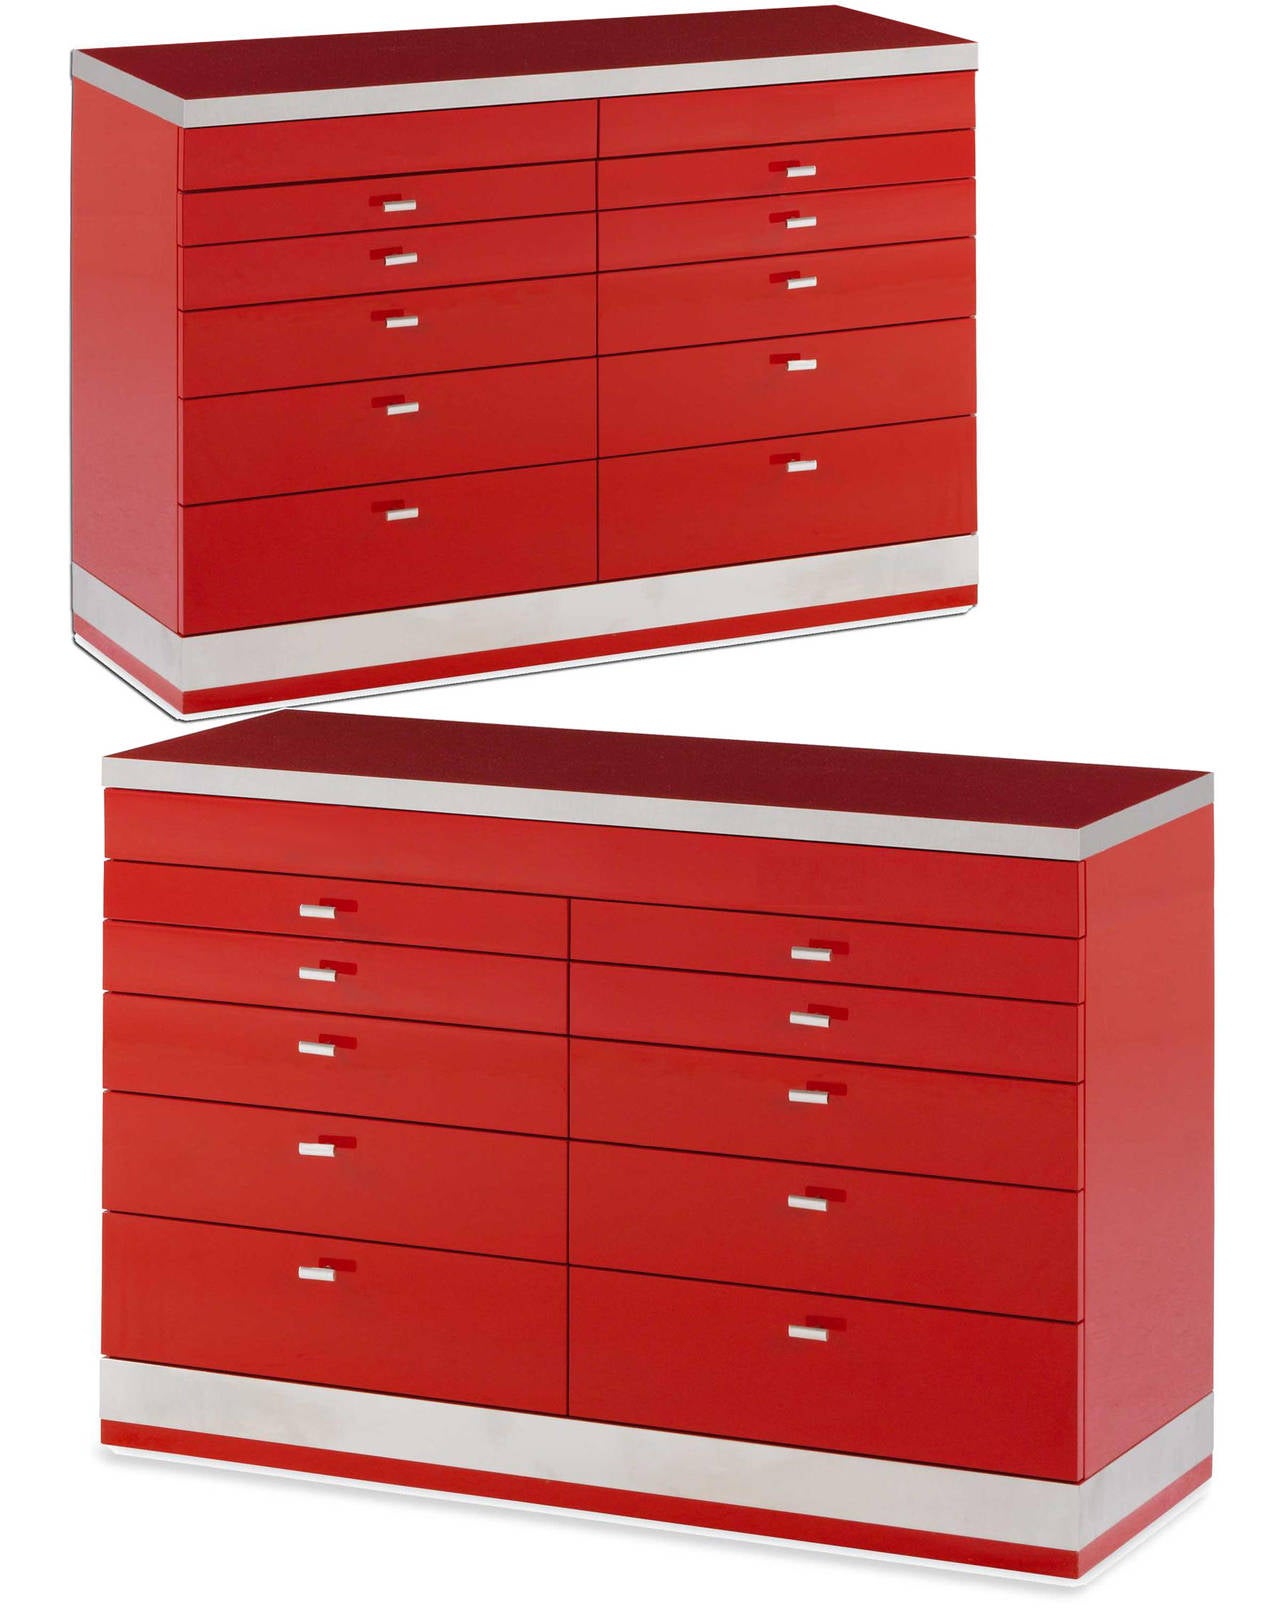 A pair of red lacquer MC-11 commodes by Willy Rizzo, with ten graduated drawers and one secret drawer. Interiors in mahogany and finished in stainless steel.